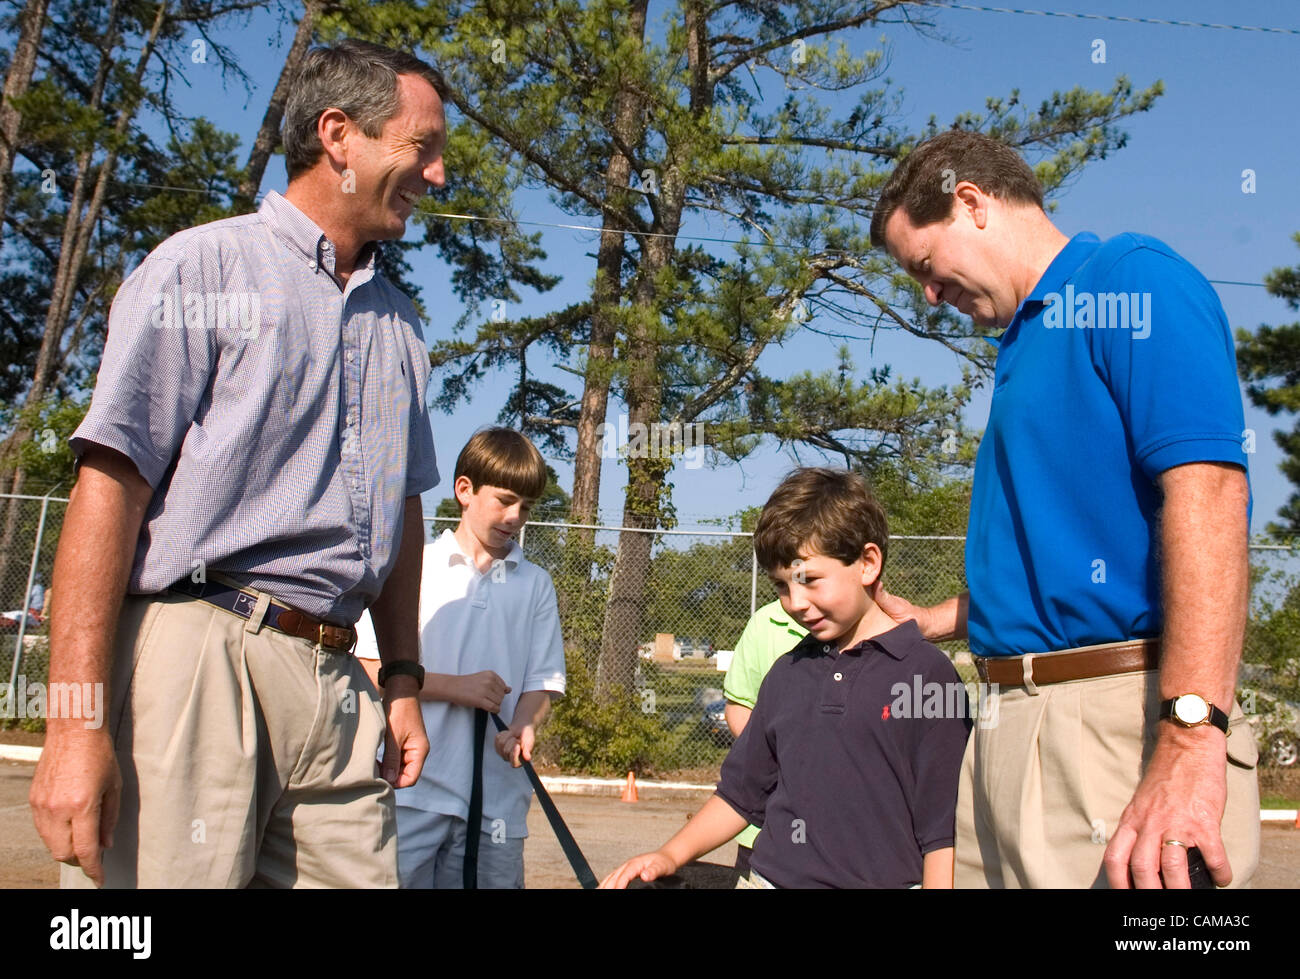 South Carolina Governor Mark Sanford, left, and his sons, speaks with former Republican presidential candidate Sam Brownback at a Labor Day Parade in Chapin, South Carolina on September 3, 2007. (Credit Image: © Erik Lesser/ZUMA Press) Stock Photo